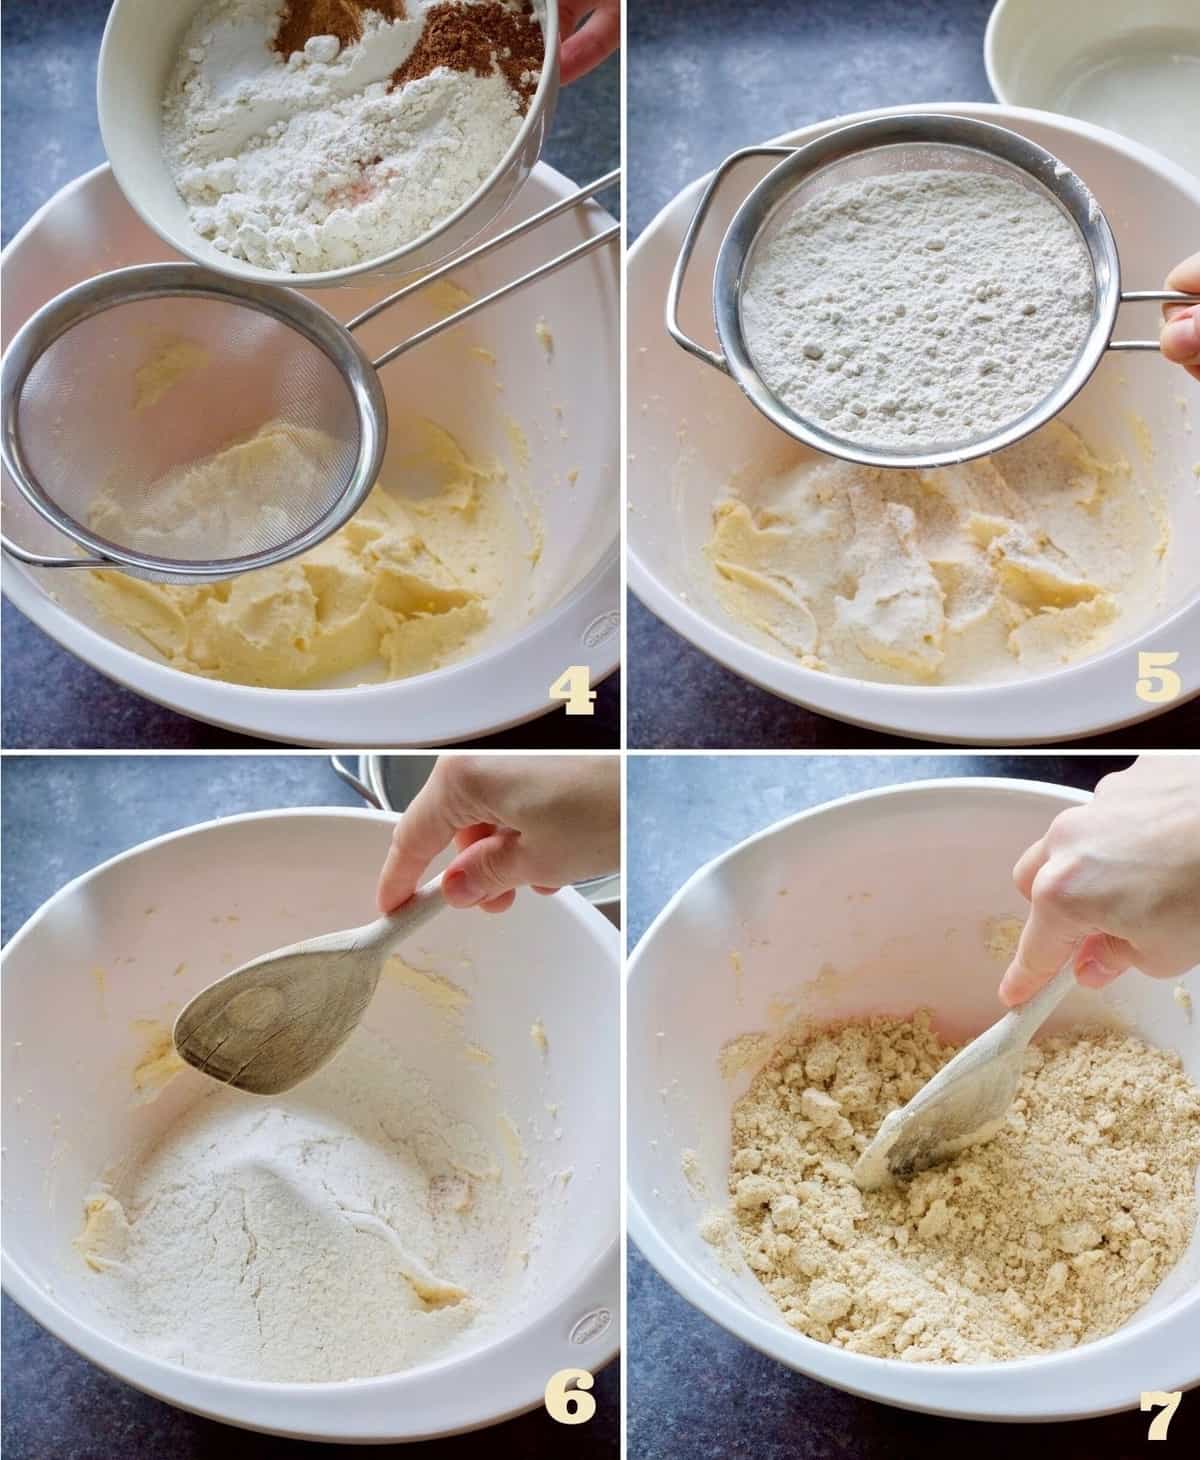 Sifting in dry ingredients and mixing with a spoon.